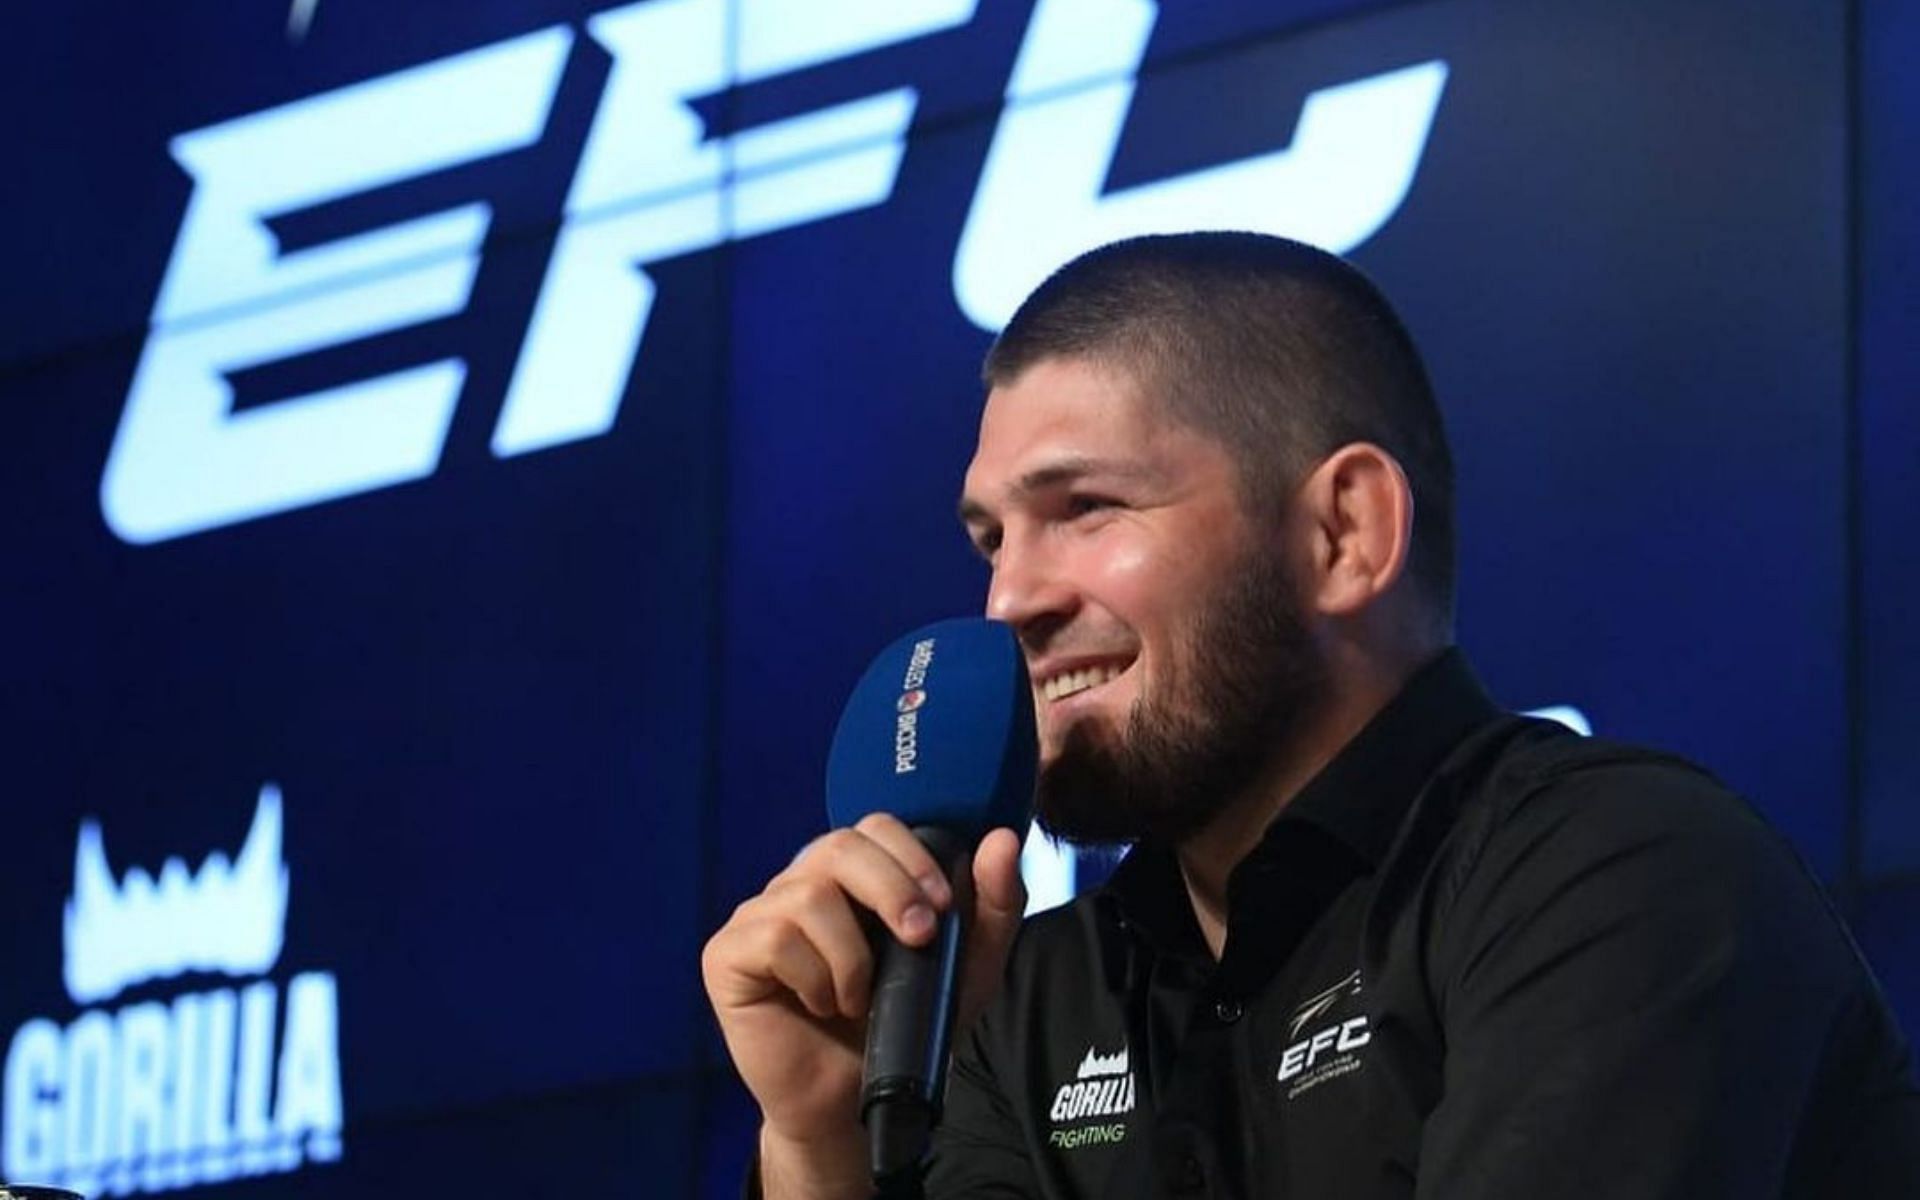 I've my principle" - Khabib Nurmagomedov says Eagle FC has no intentions of competing with the UFC